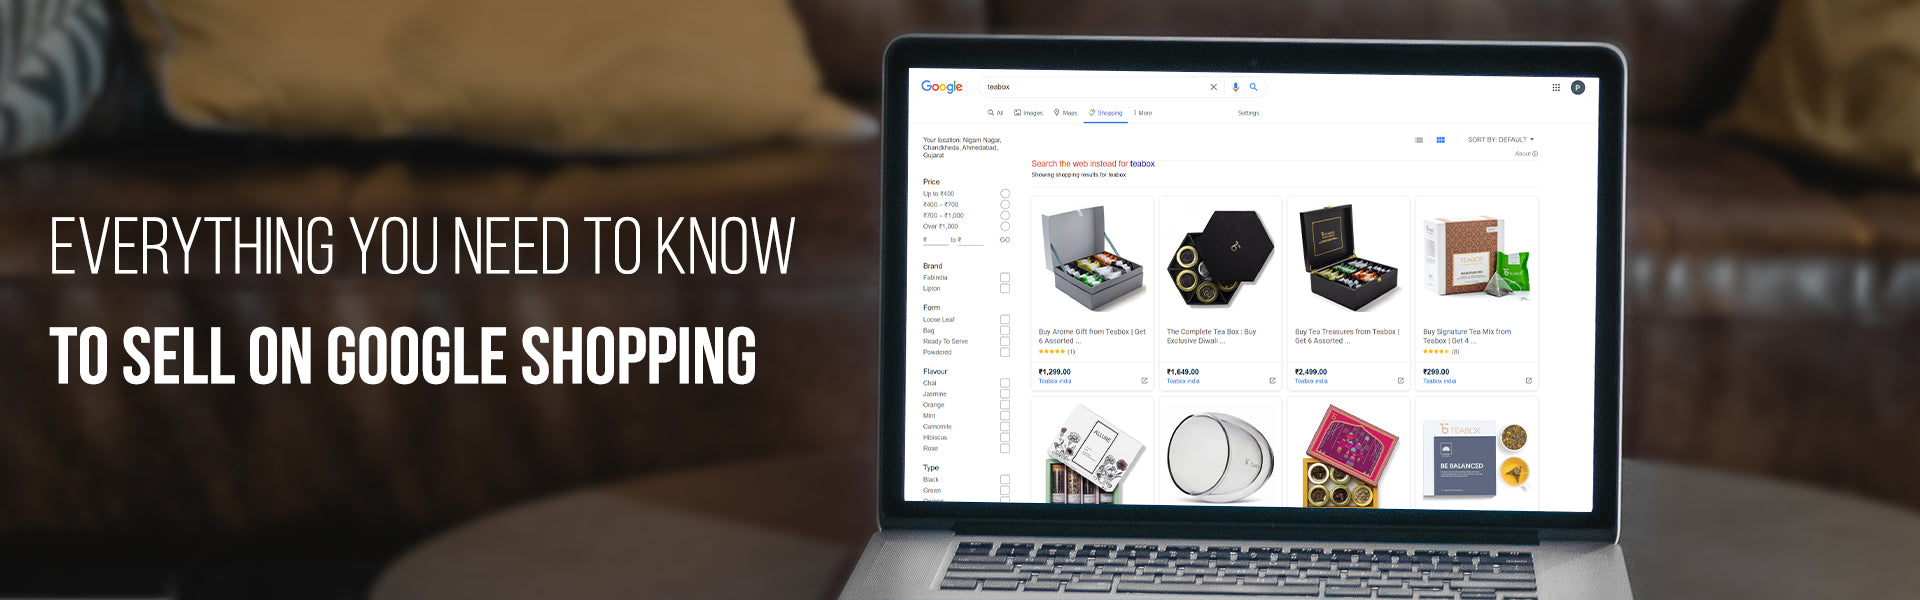 Everything You Need to Know to Sell on Google Shopping